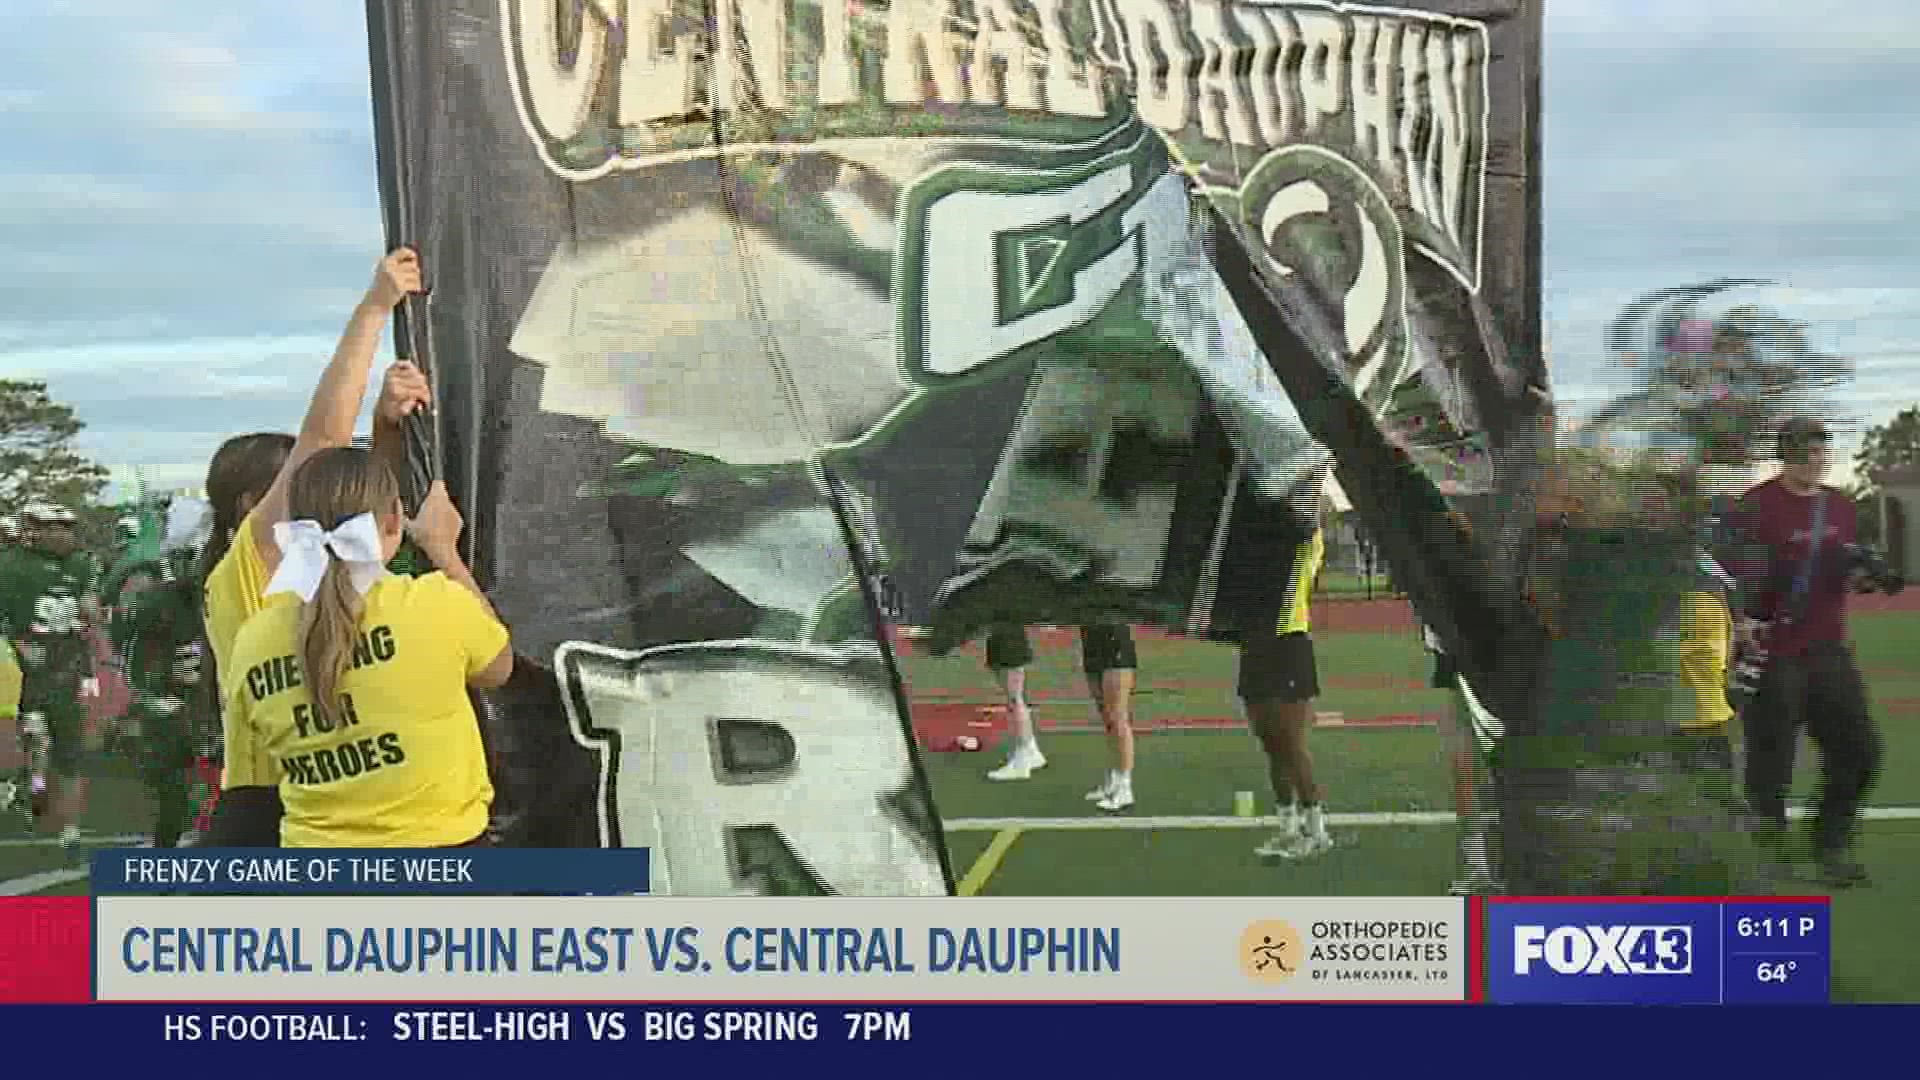 Central Dauphin coach Glen McNamee and CD East coach Lance Deane speak to FOX43 ahead of their meeting in Week 9.